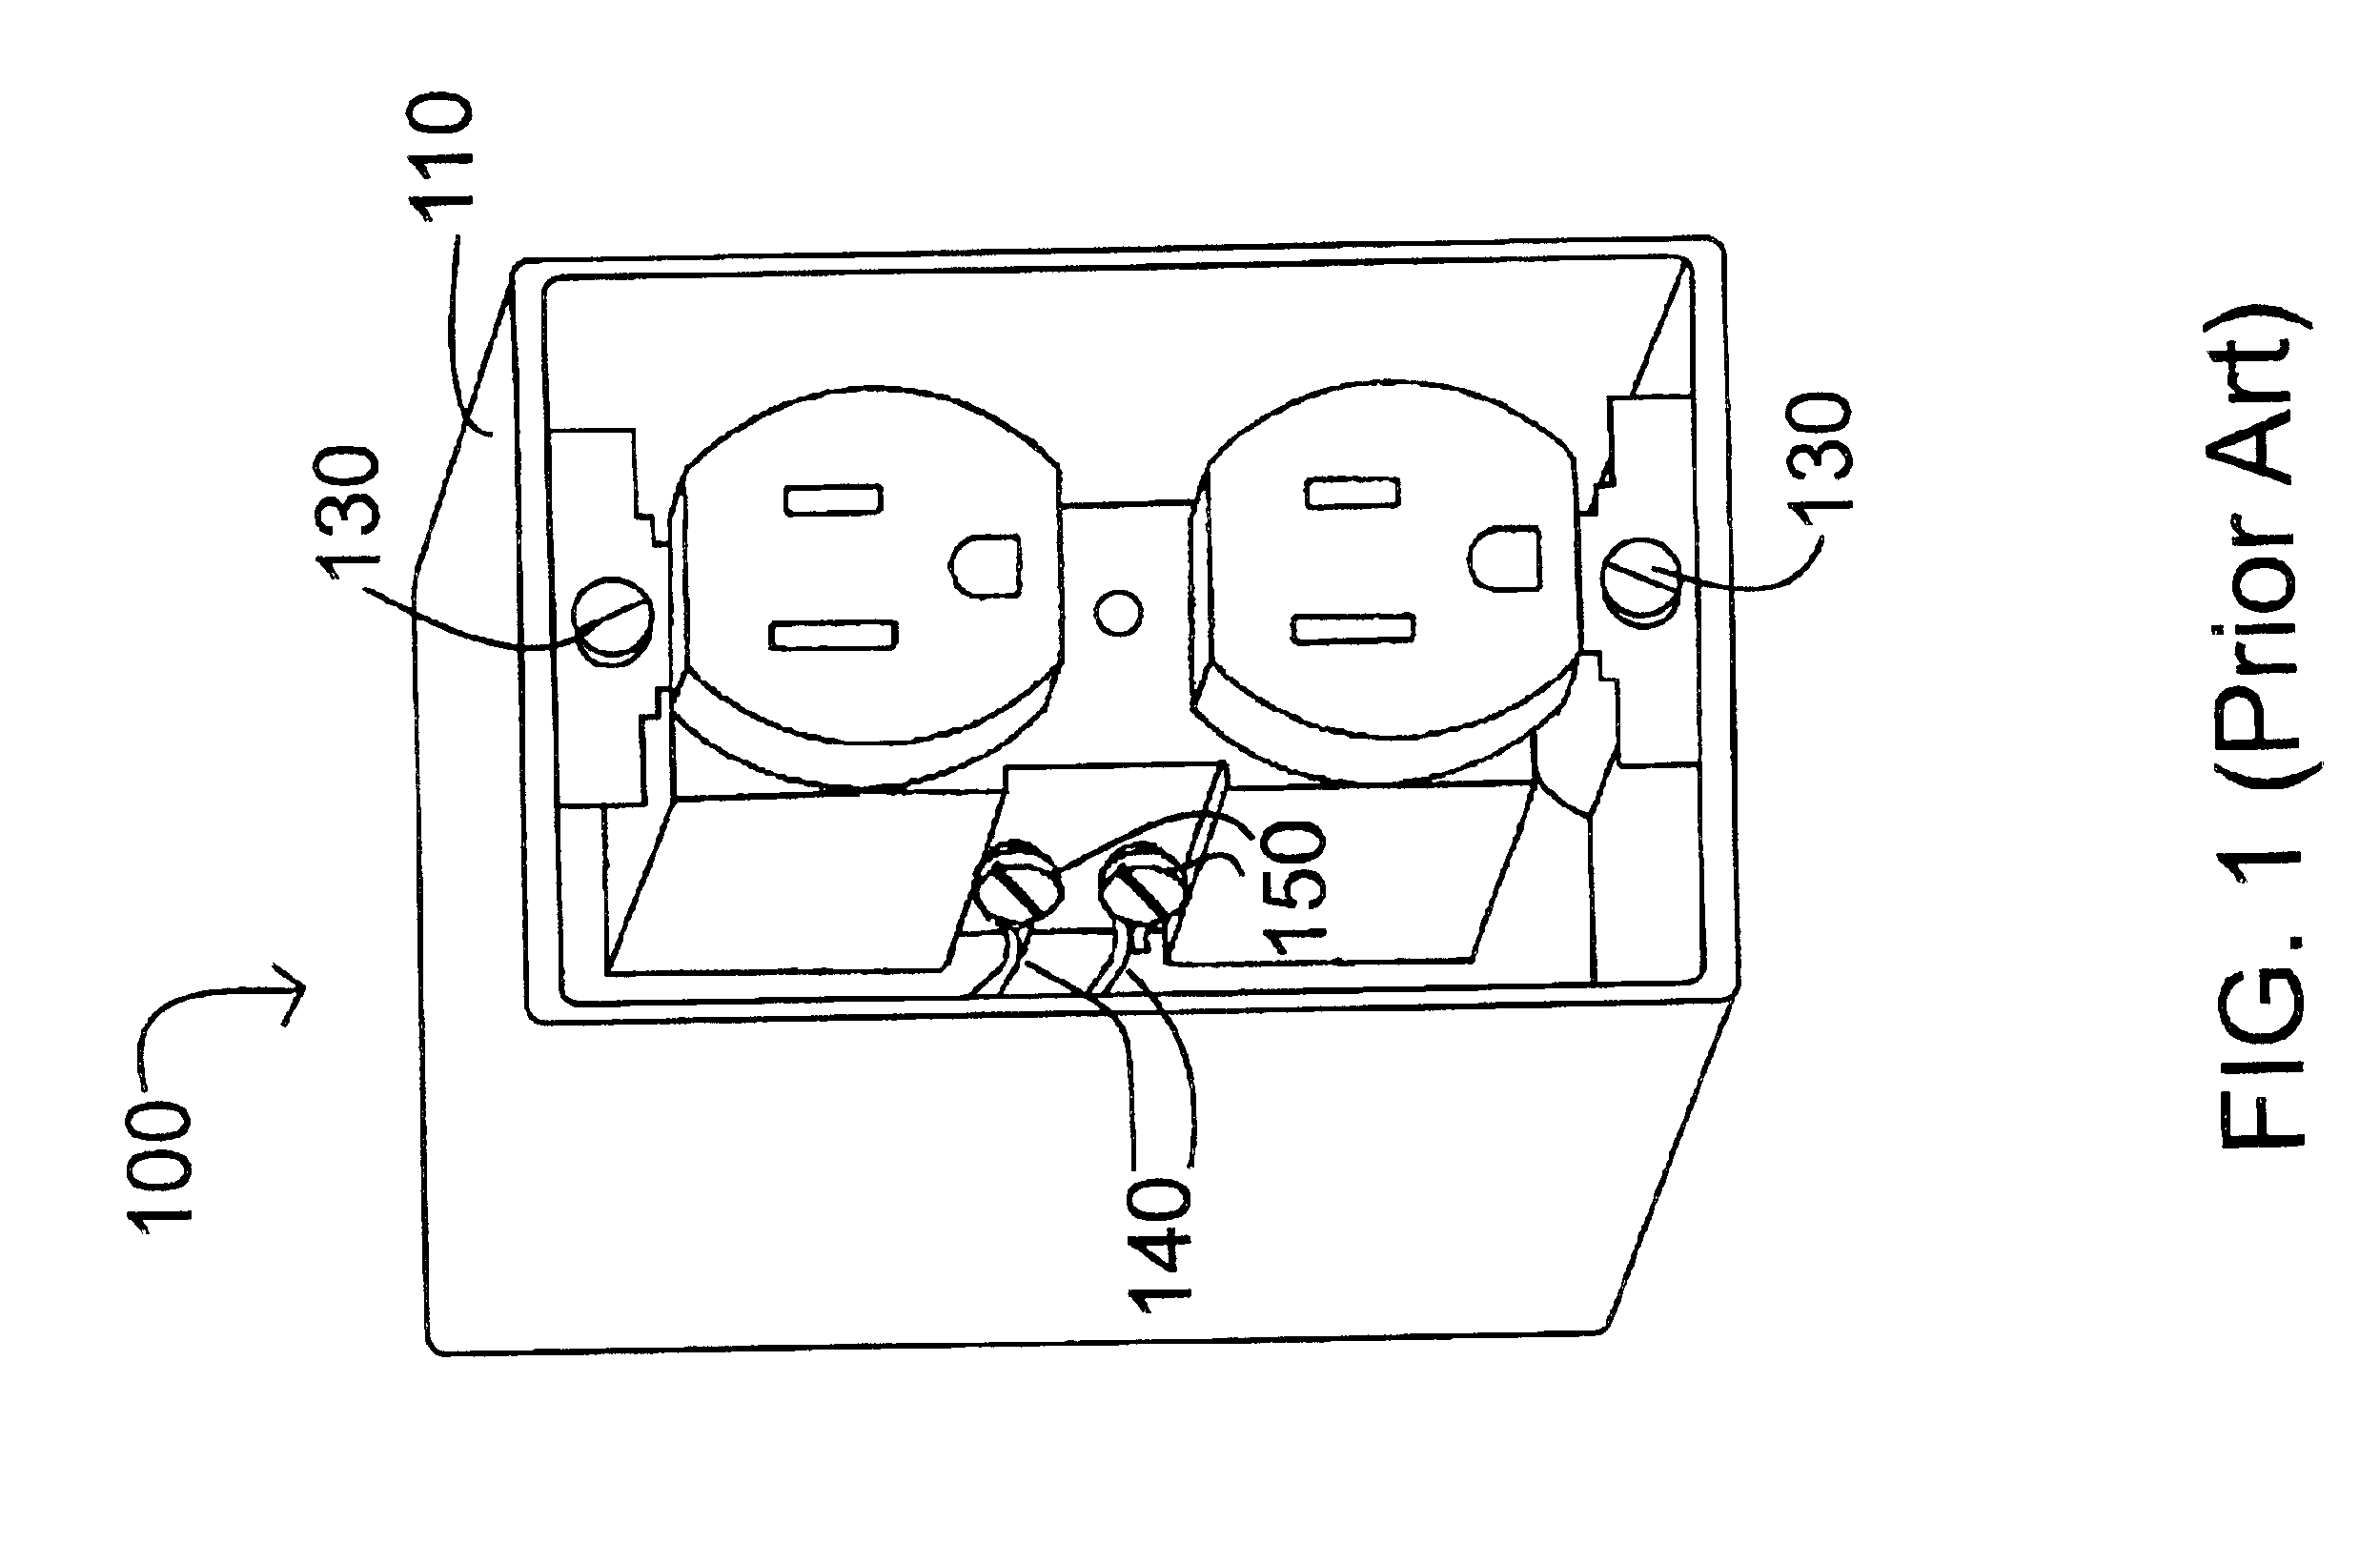 Safety electrical outlet and switch system